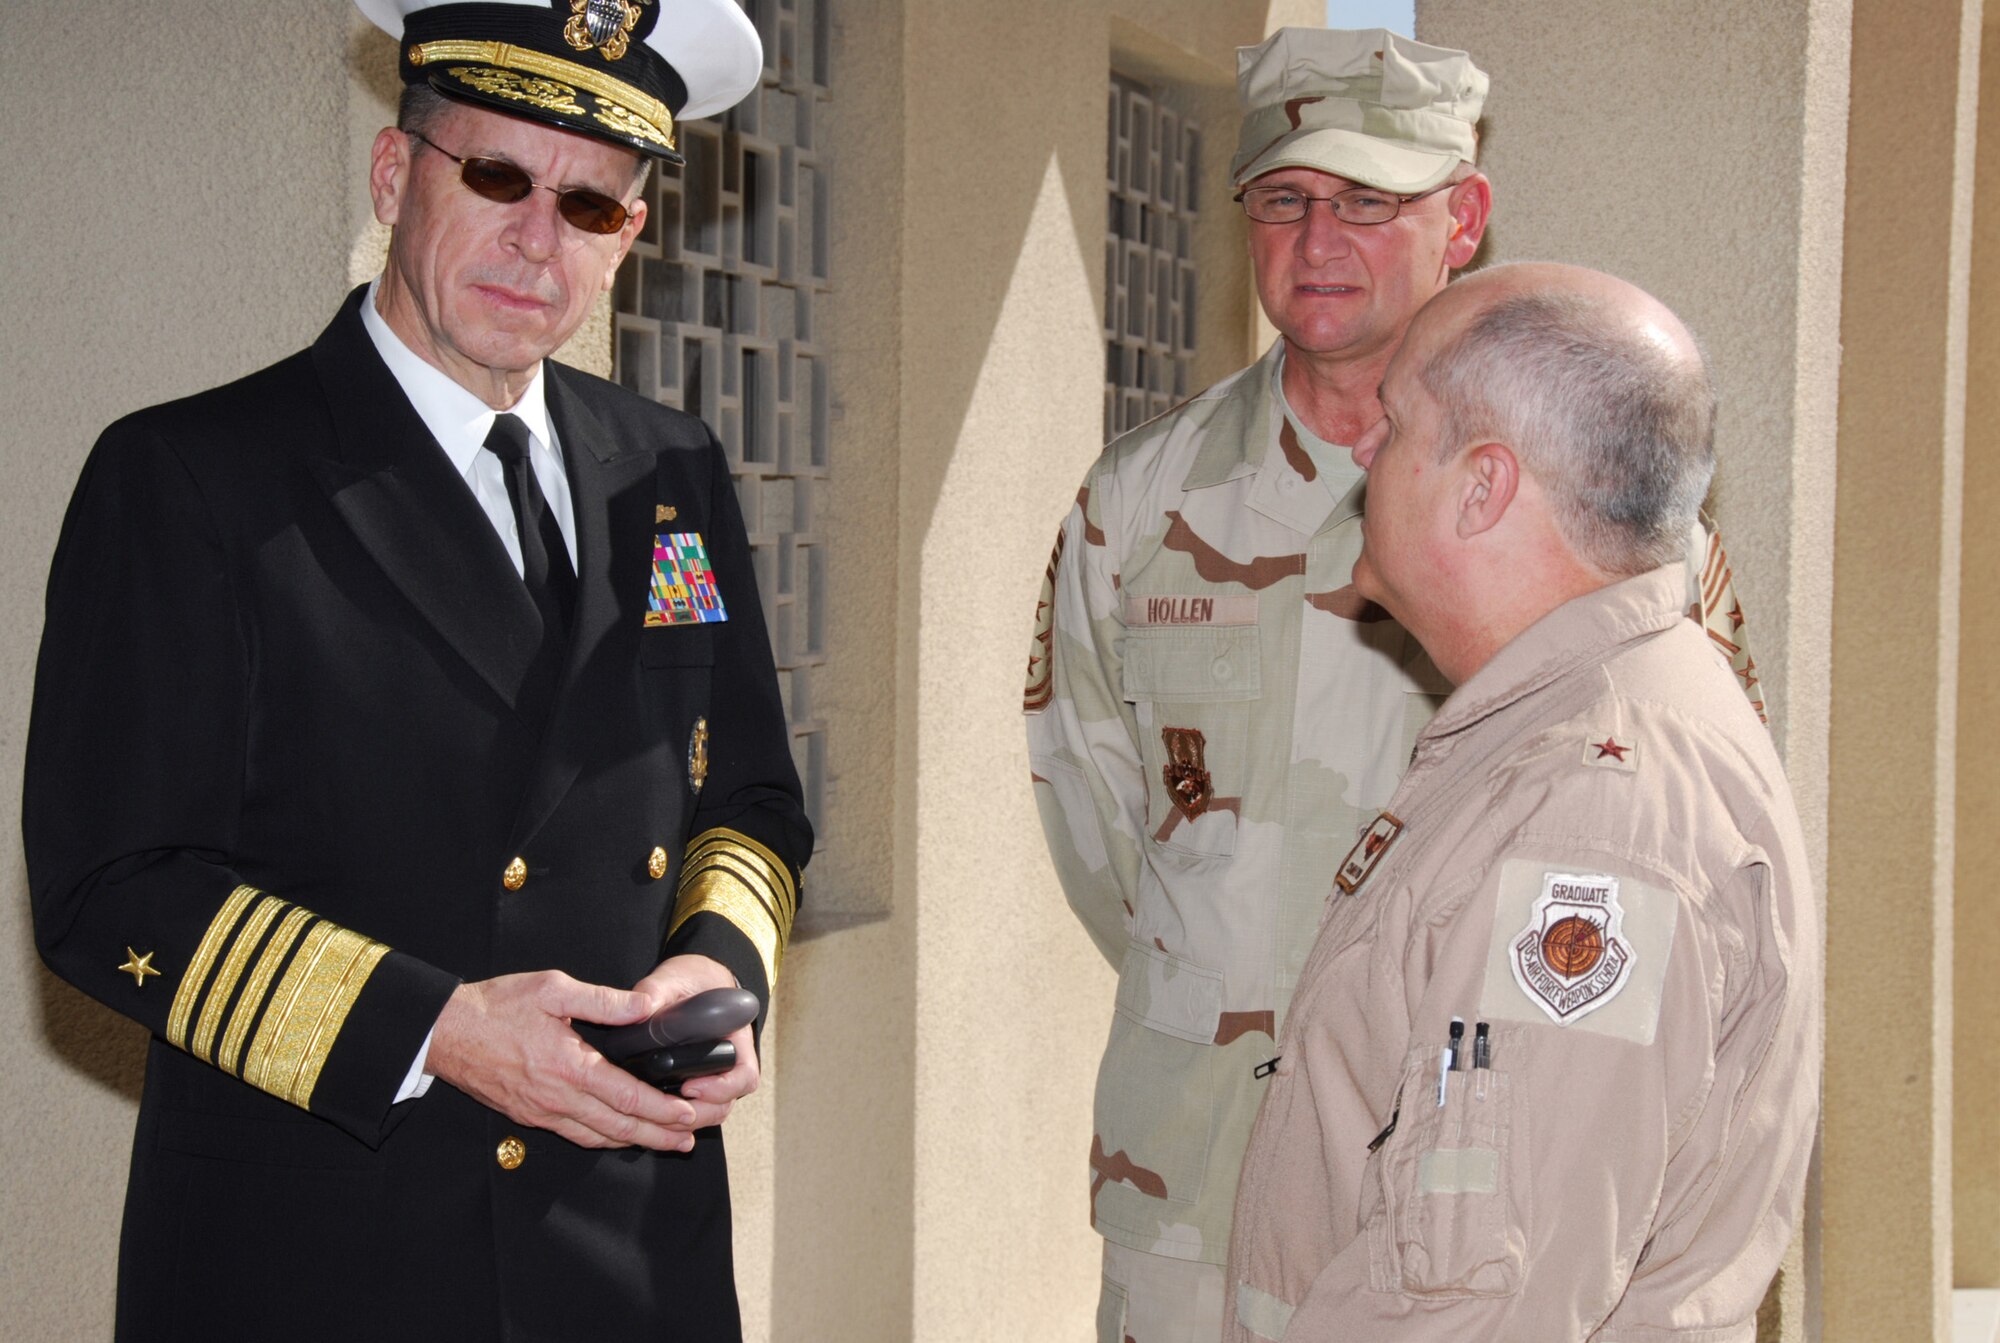 SOUTHWEST ASIA - Admiral Mike Mullen, chairman of Joint Chiefs of Staff, has a few parting words with Brig. Gen. Charlie Lyon, 379th Air Expeditionary Wing commander, and Chief Master Sgt. Lloyd Hollen, 379th AEW command chief, before leaving a Southwest Asia air base Dec. 17. The chairman and his wife, Deborah, are making a tour of the Southwest Asia theater with the USO 2007 holiday show. 
(U. S. Air Force photo/Staff Sgt. Douglas Olsen)